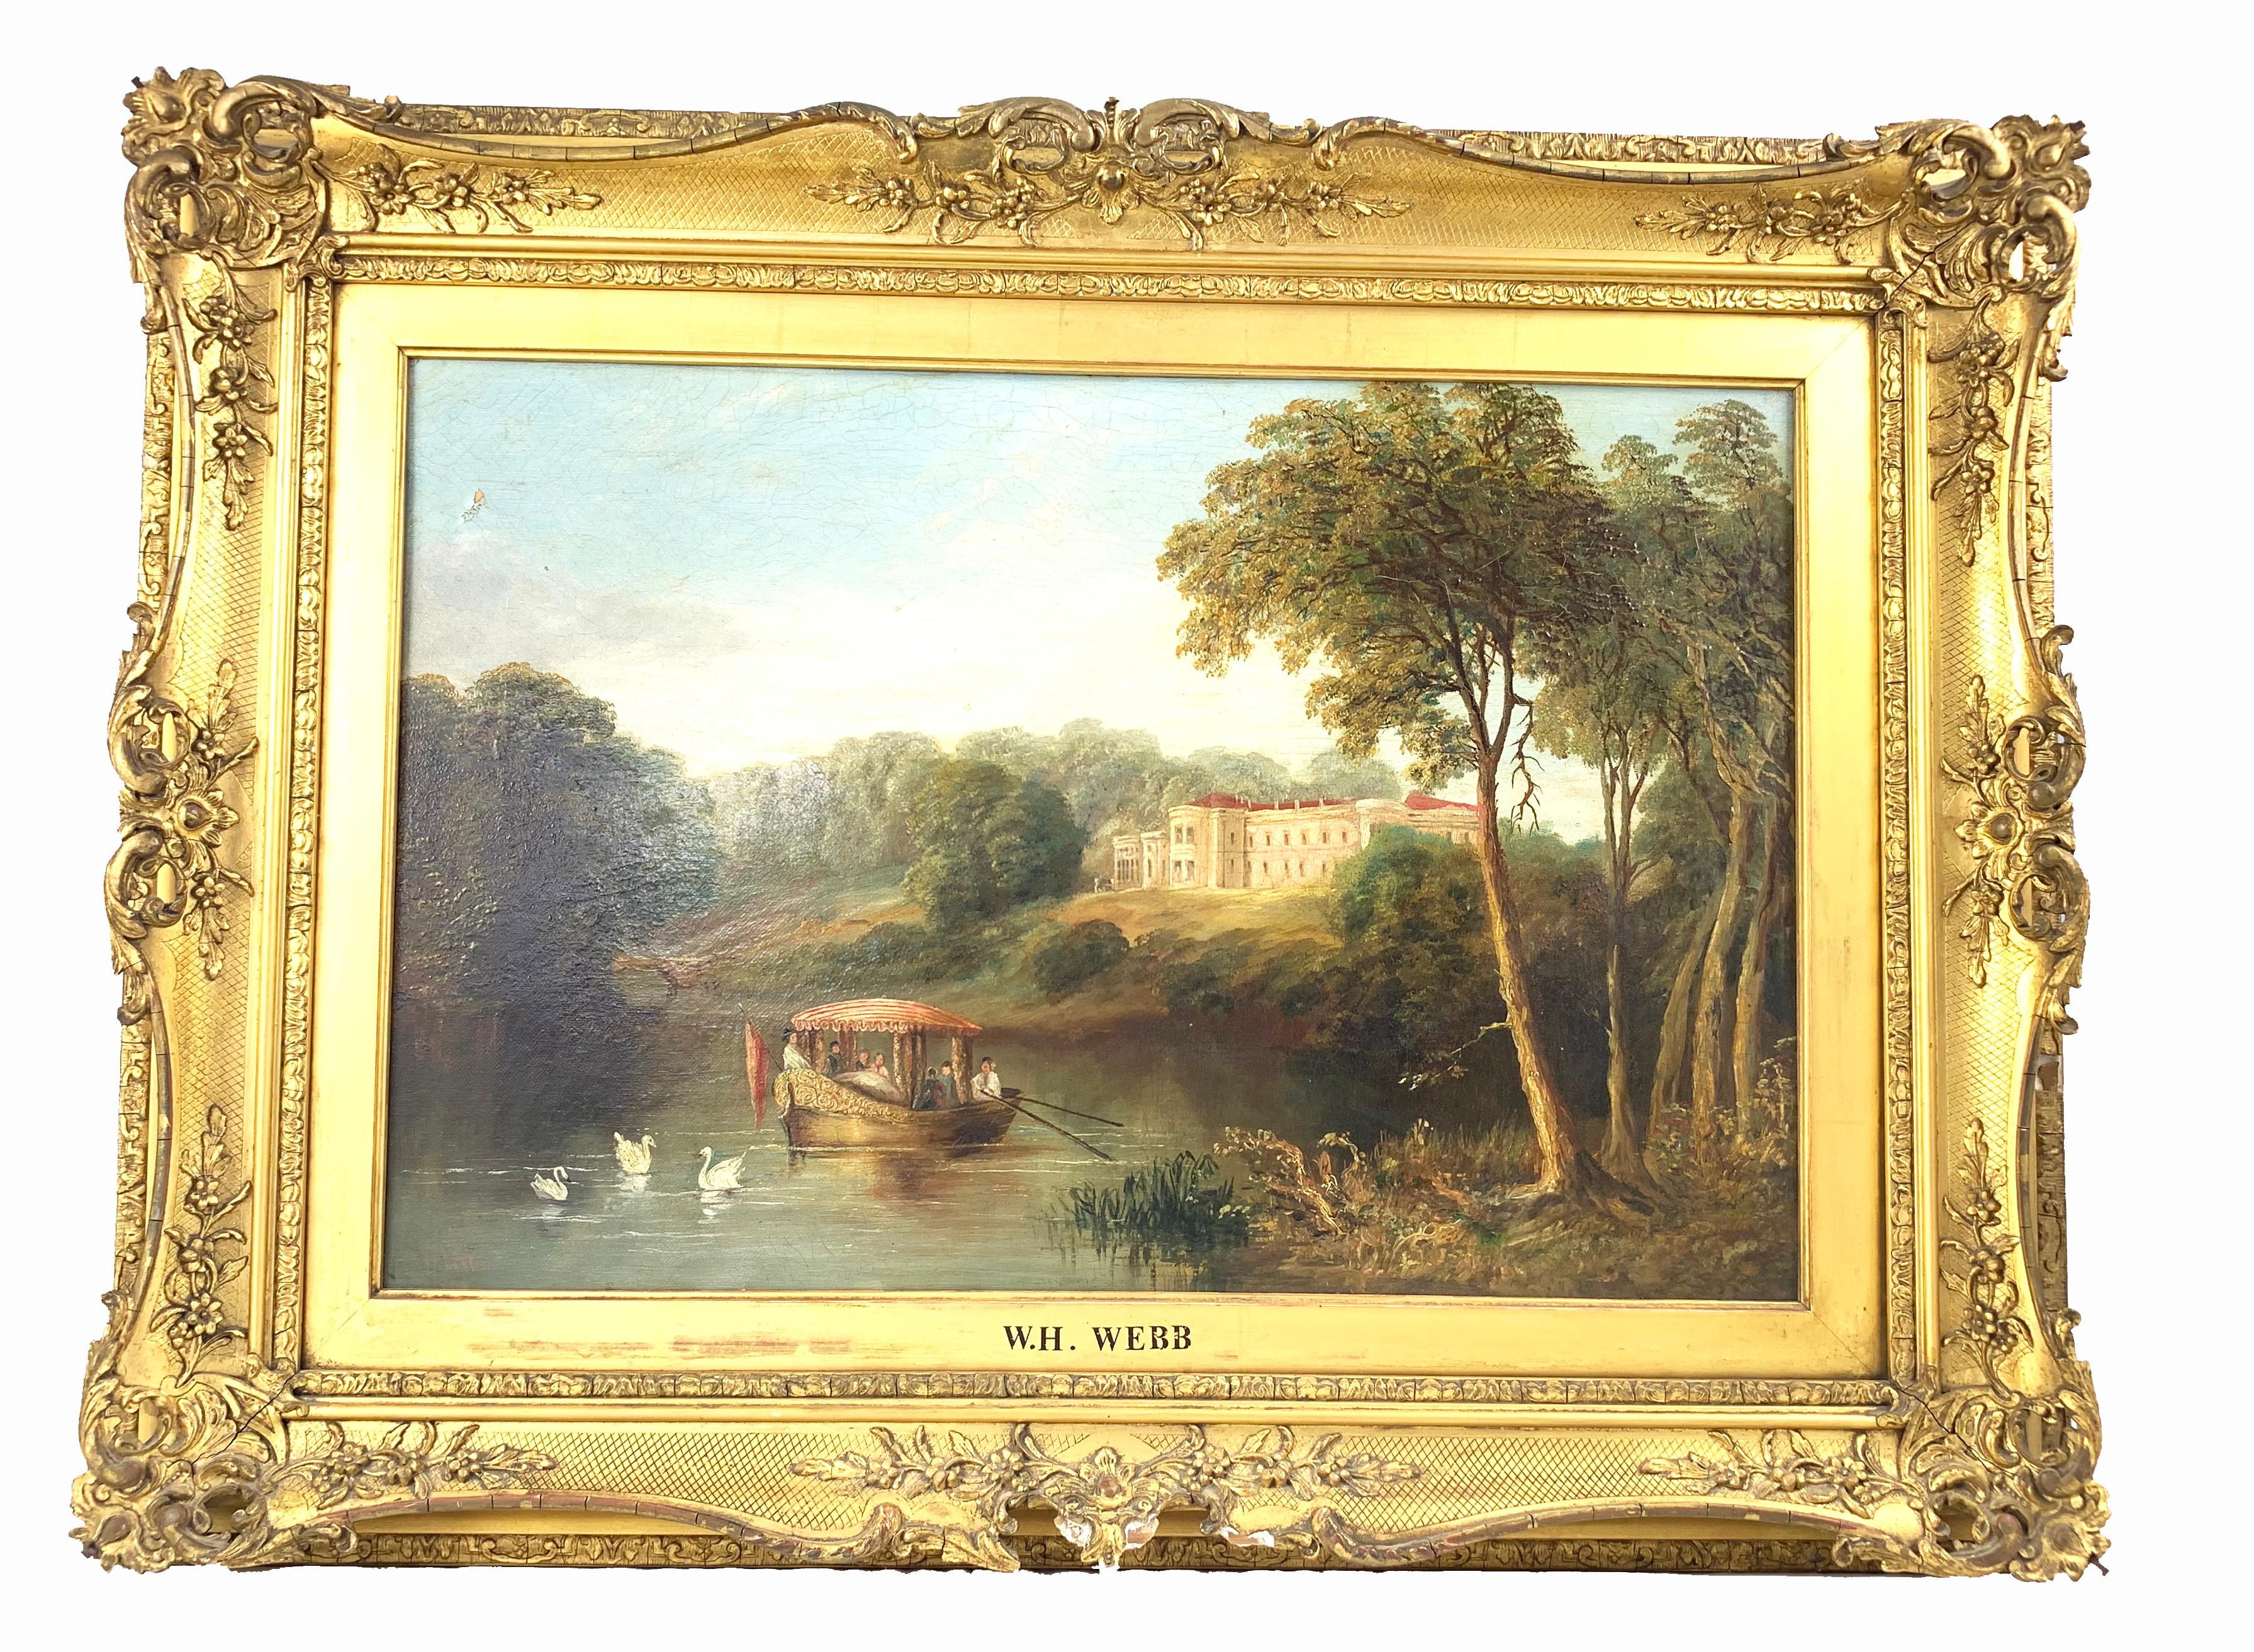 William H Webb oil on canvas. British 1862-1903. 

Figures boating on a lake. A country house in the background. Signed on the gilt frame.

William Webb
British 1862-1903

William Webb was born in Manchester in 1862 and was almost entirely a